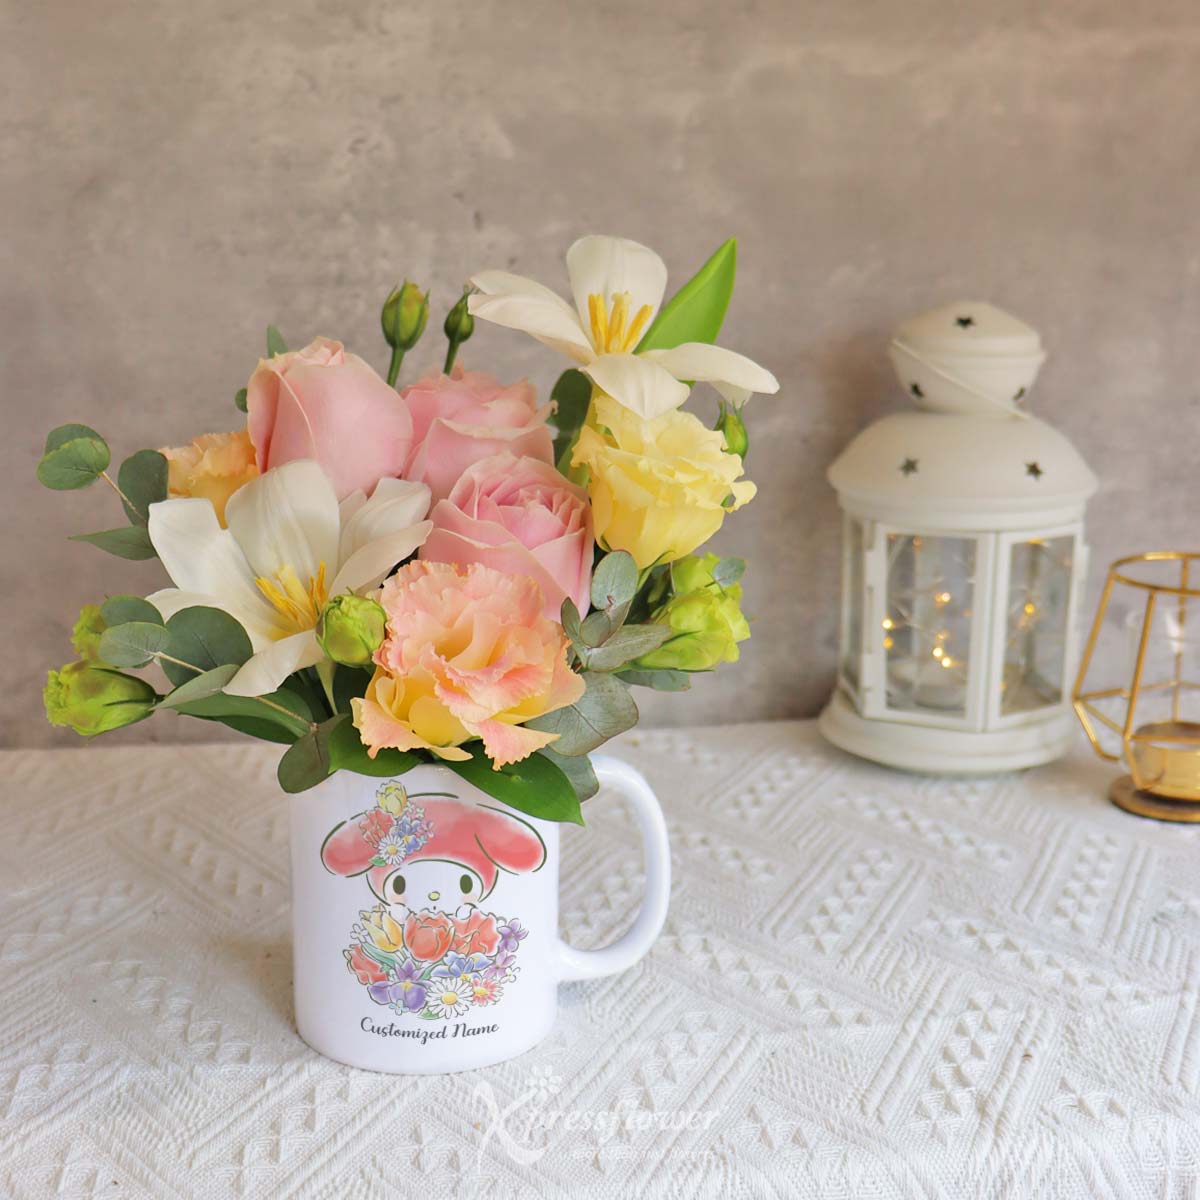 SNMG2311_Whimsical Pisces 2 White Tulips & 3 Pink Roses with My Melody Personalised Mug Pisces 3a